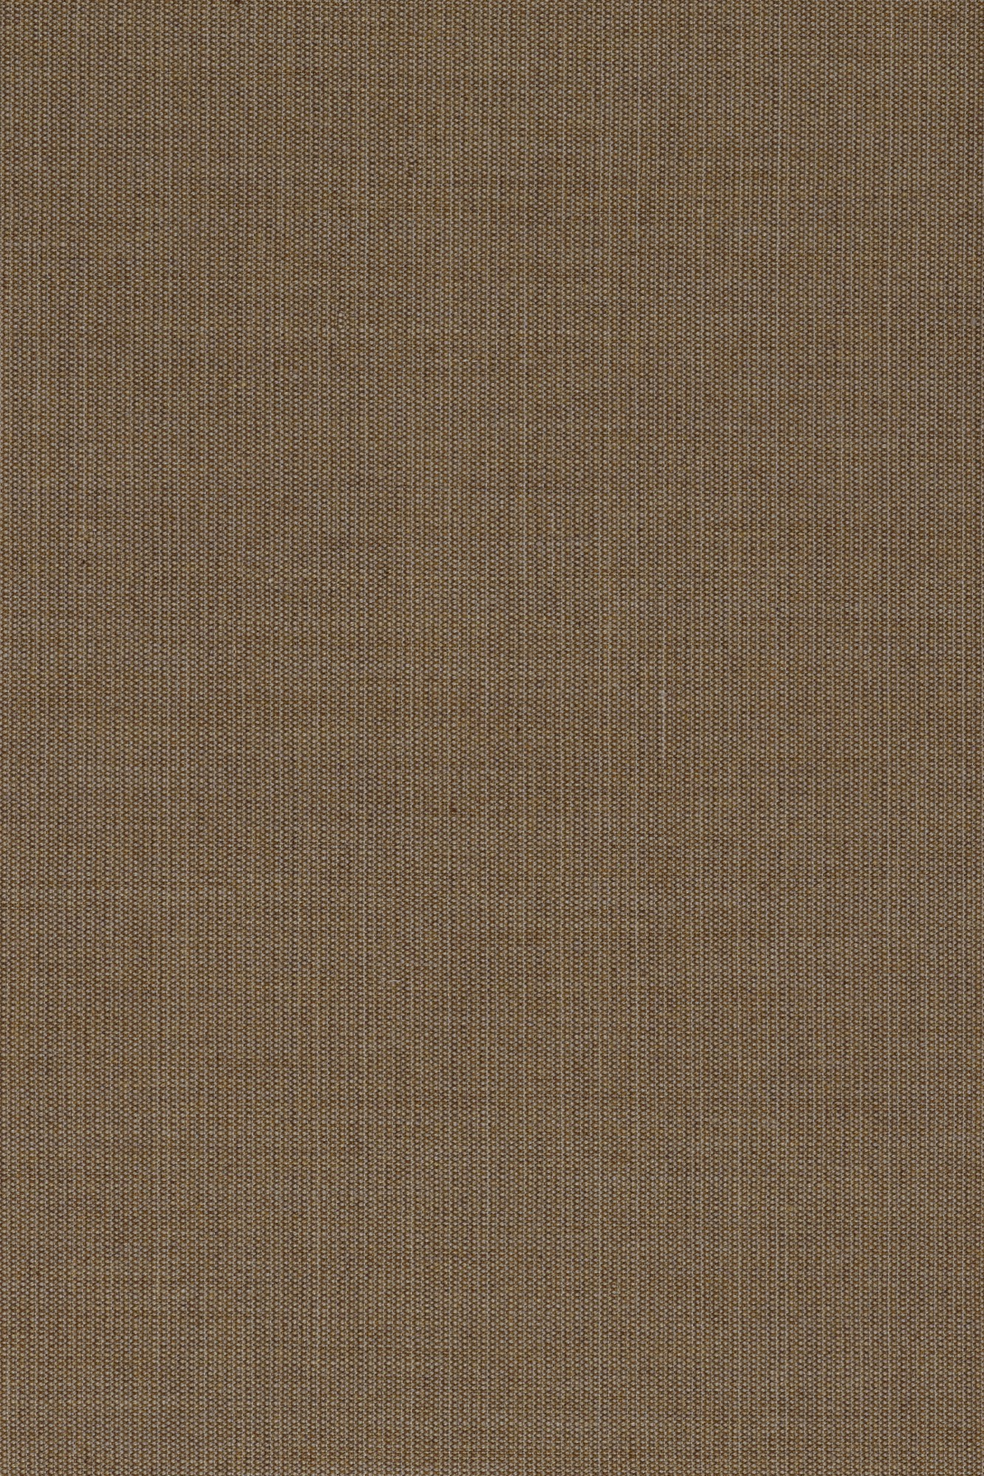 Fabric sample Canvas 2 254 brown